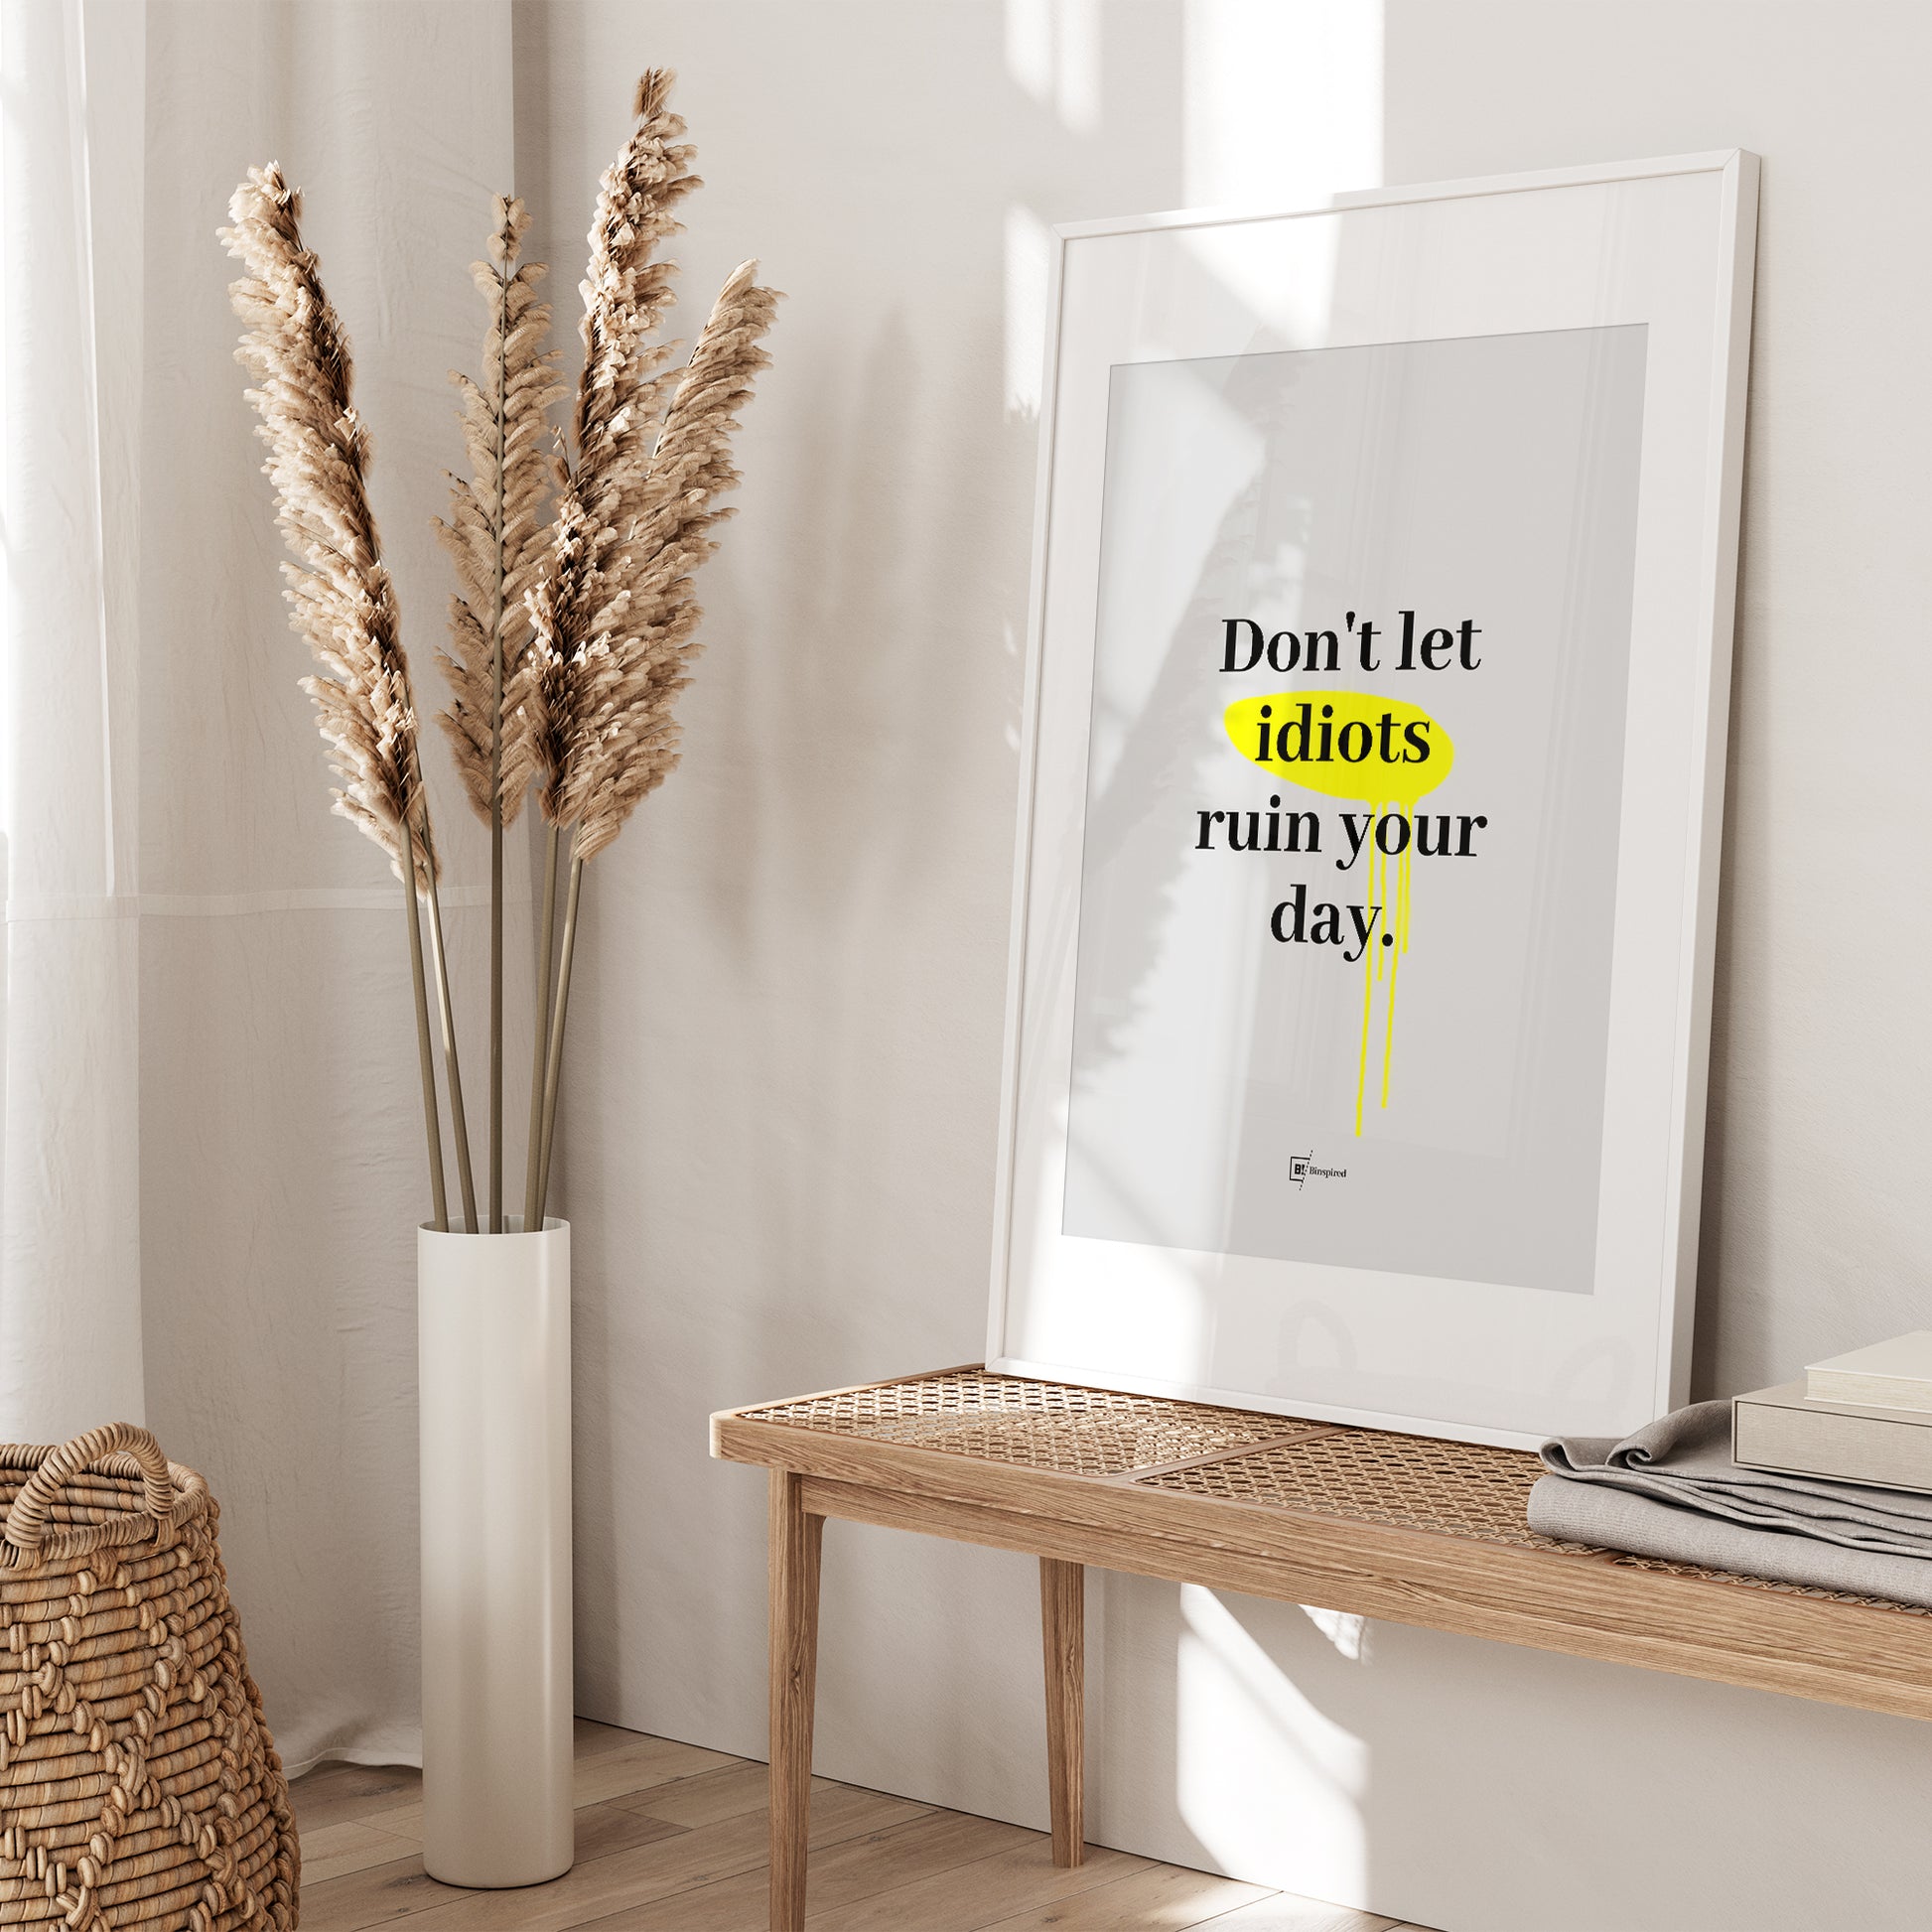 Be inspired by our "Don't let idiots ruin your day" quote art print! This artwork was printed using the giclée process on archival acid-free paper and is presented in a white frame with passe-partout that captures its timeless beauty in every detail.